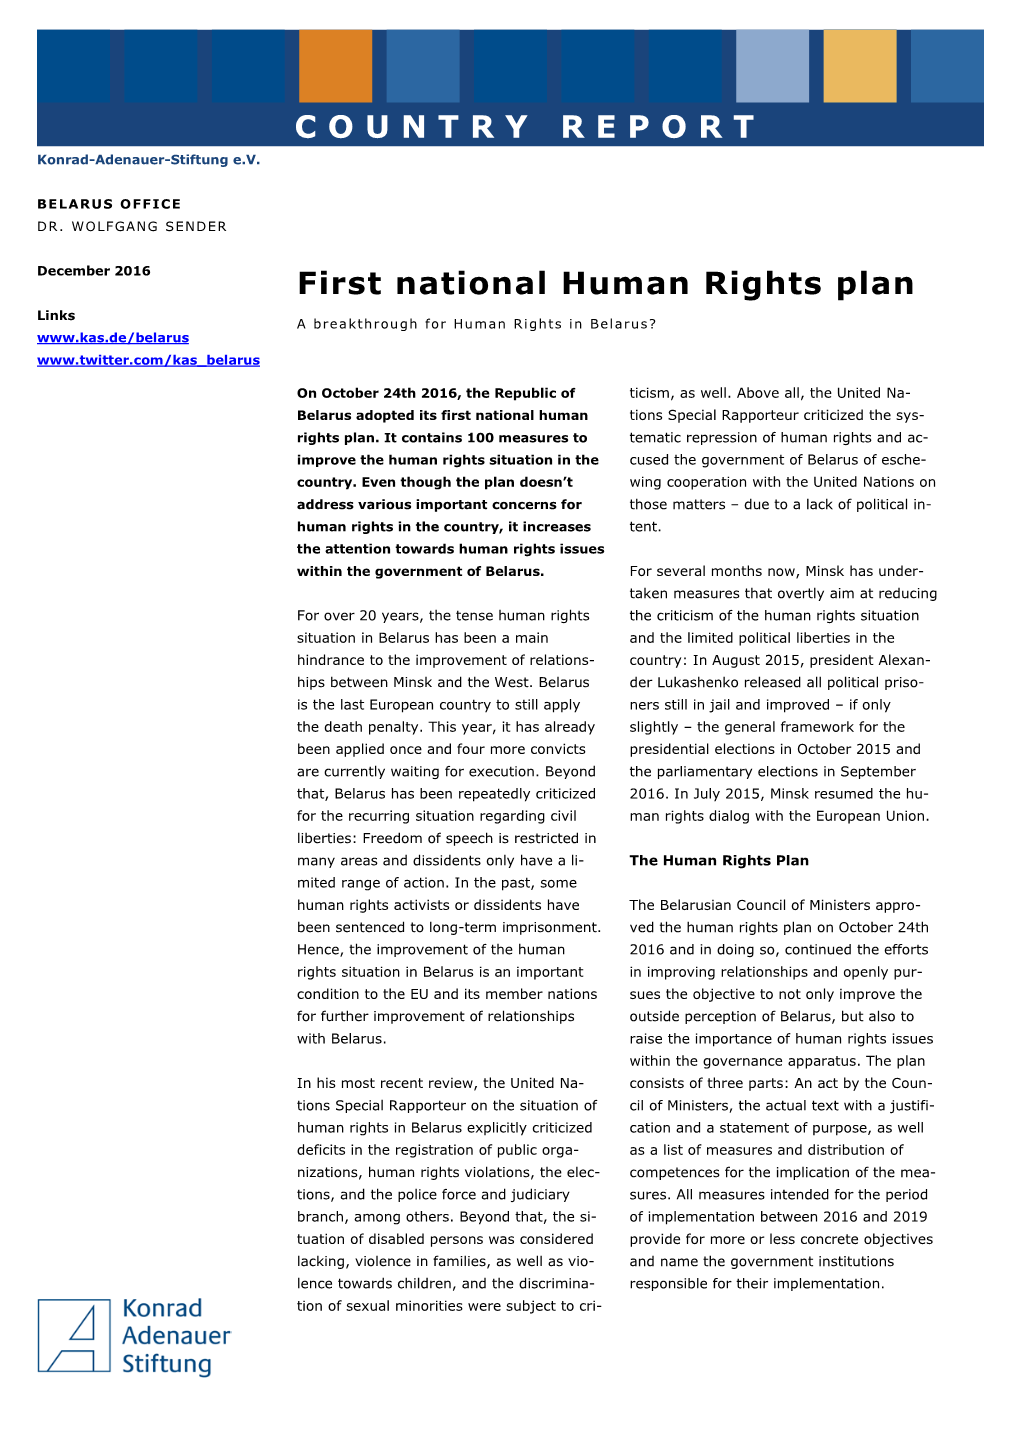 First National Human Rights Plan of Belarus